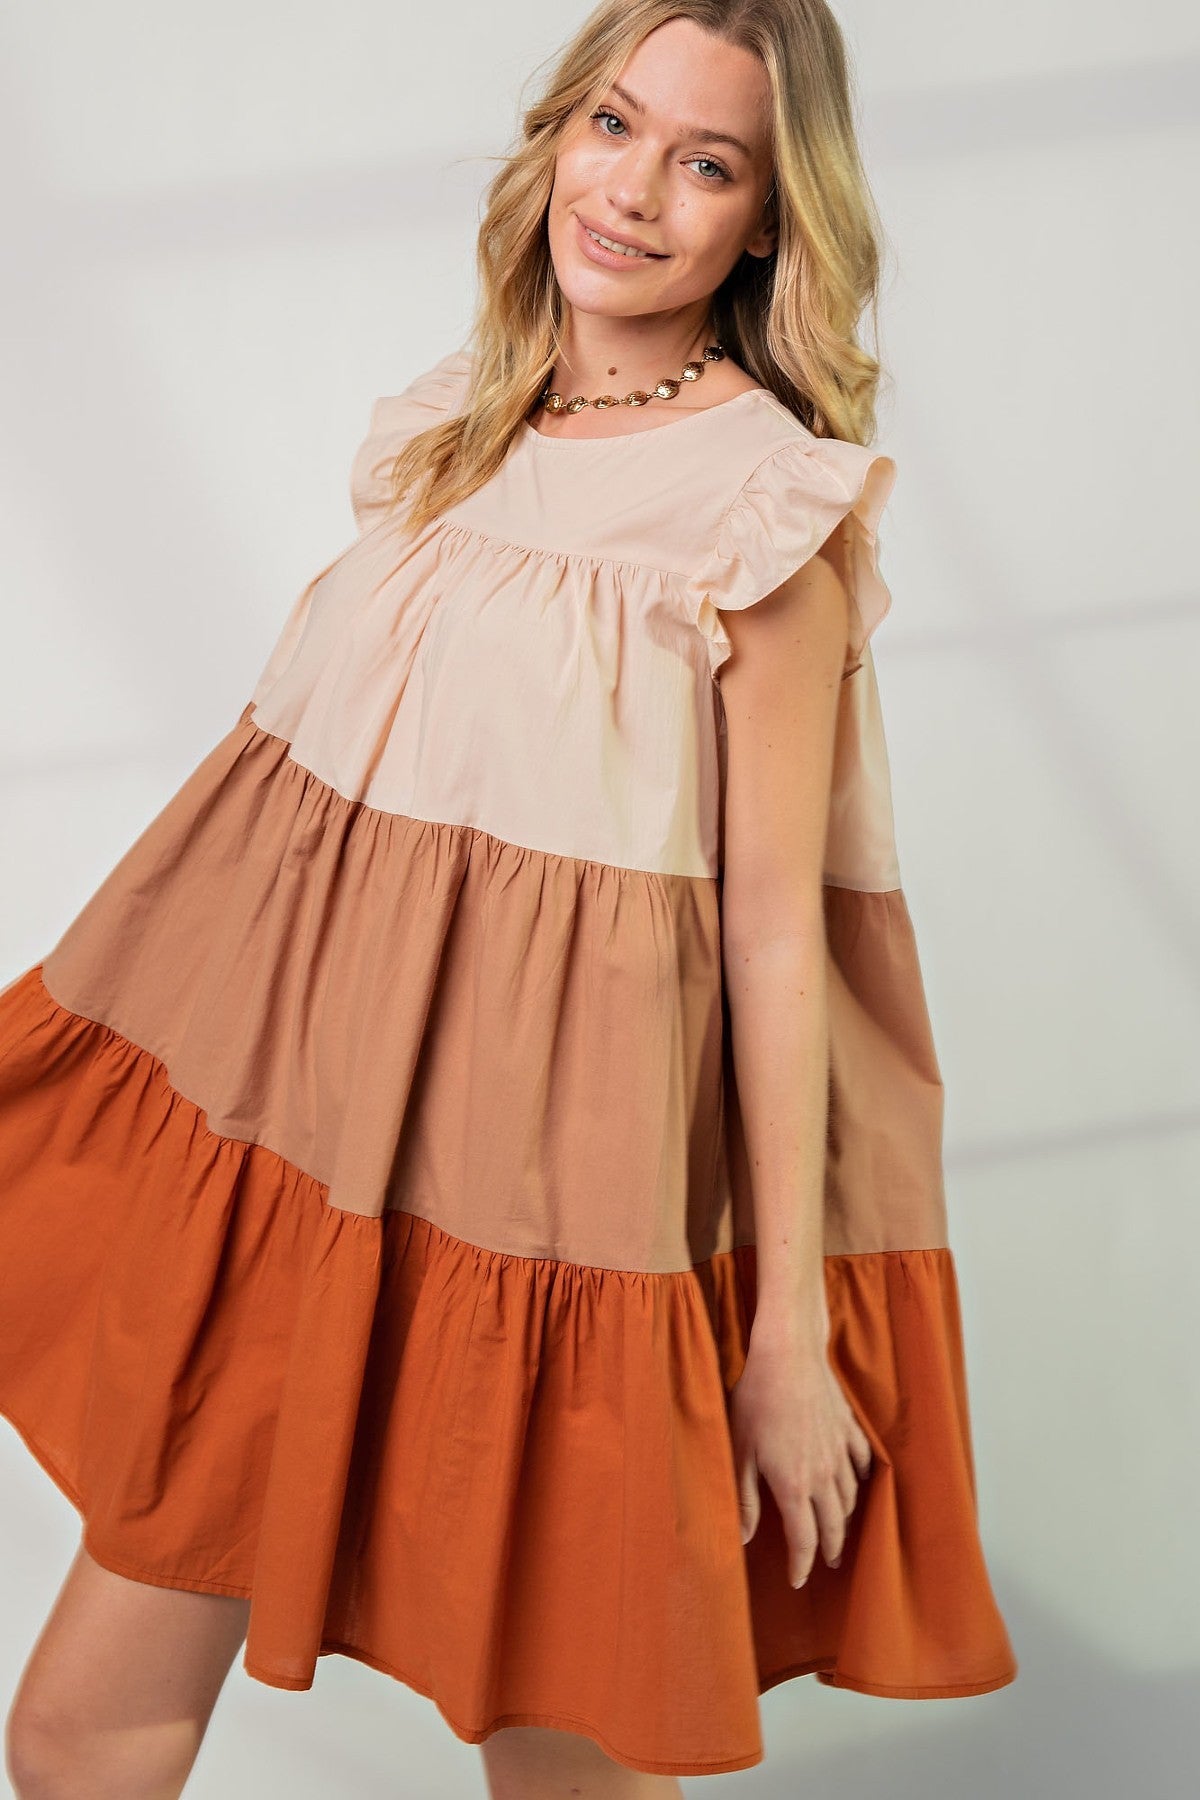 Color Block Tiered with Boat Neckline and Ruffle Sleeves Cotton Dress